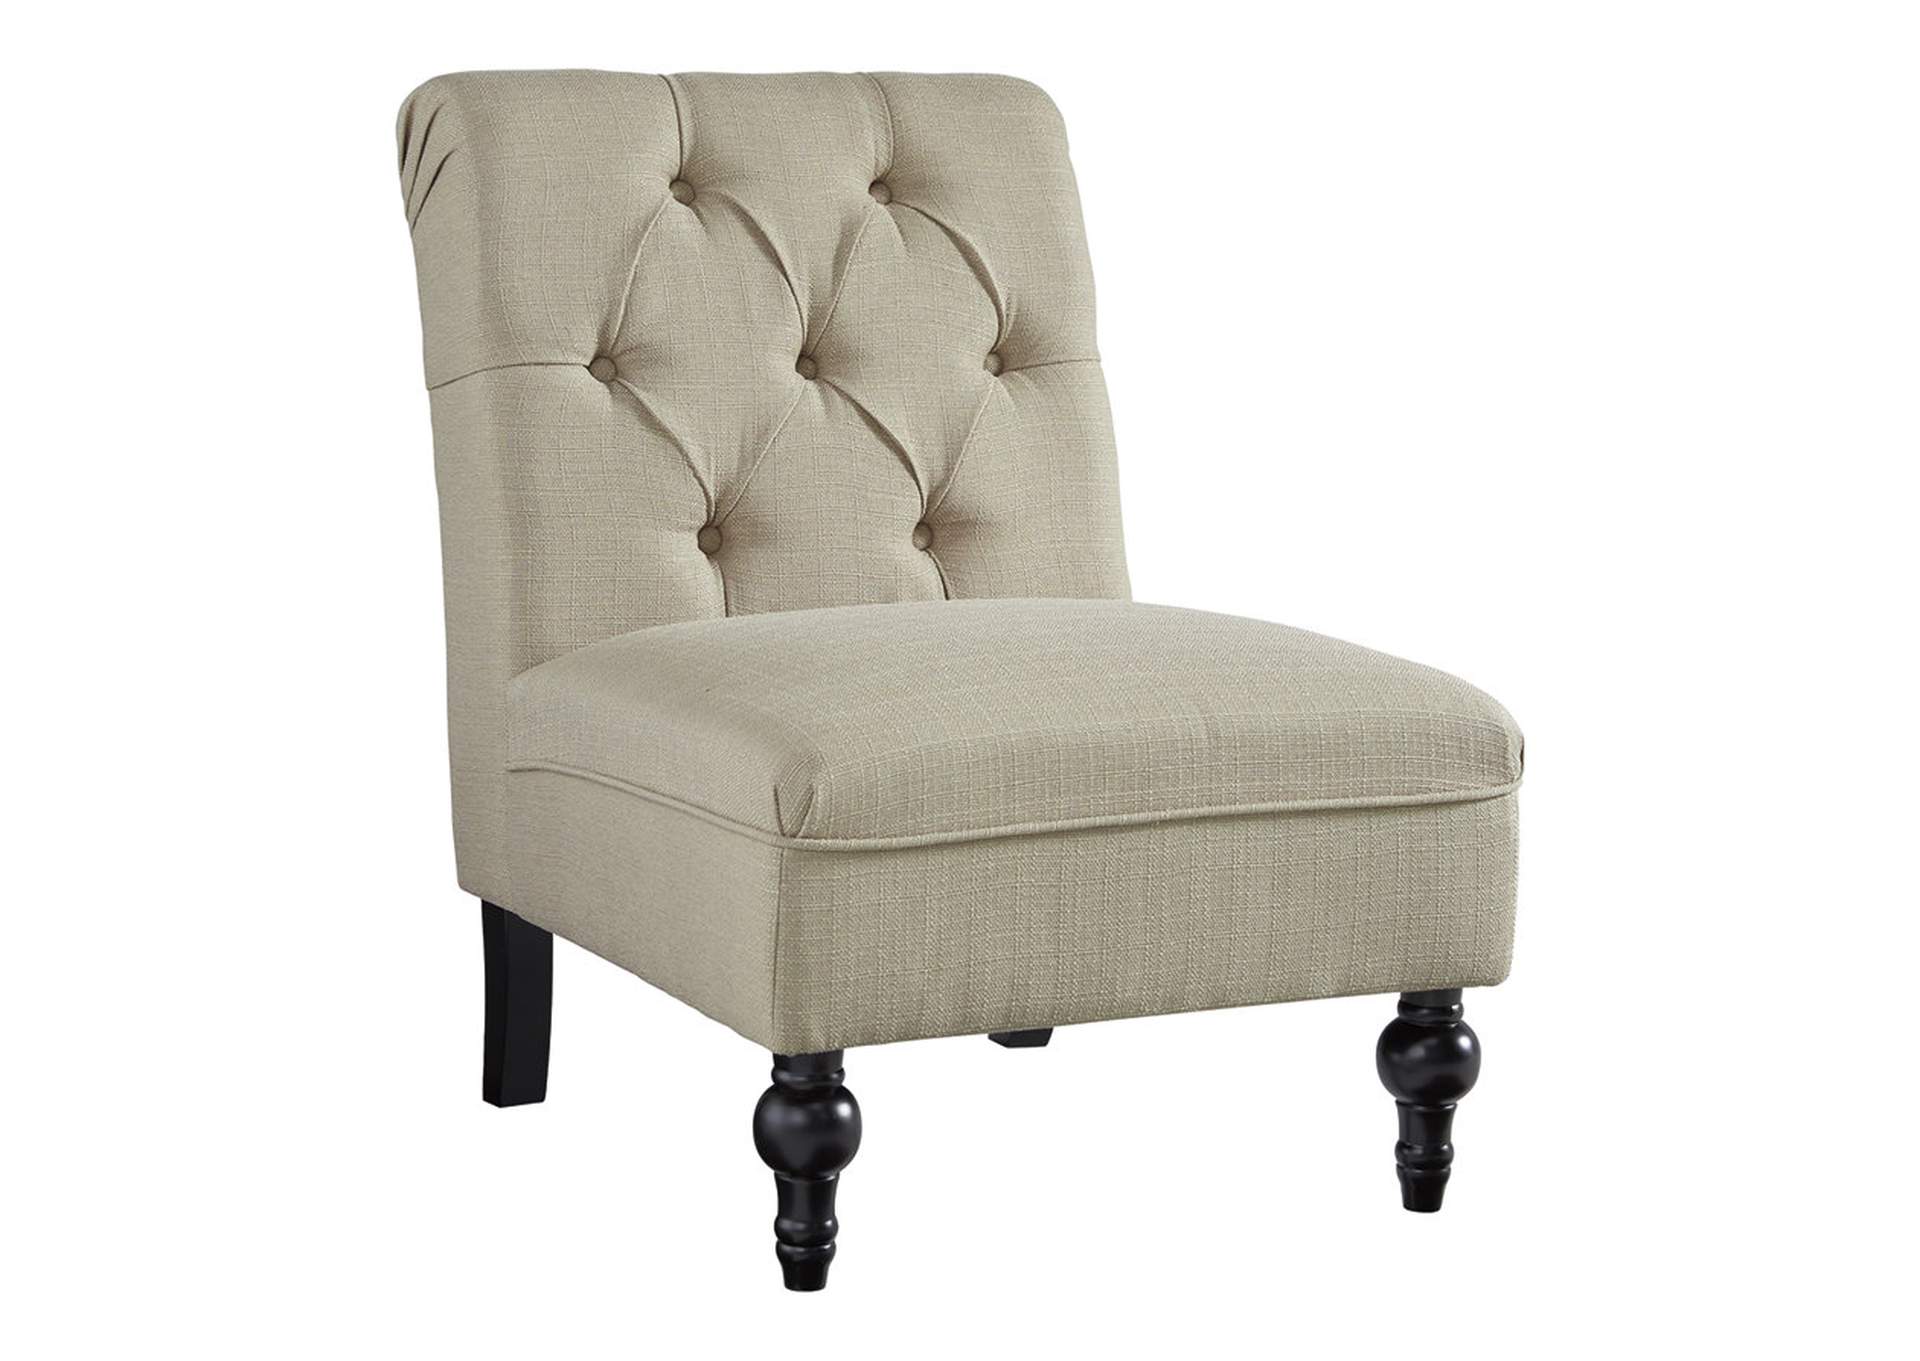 Degas Accent Chair,Direct To Consumer Express